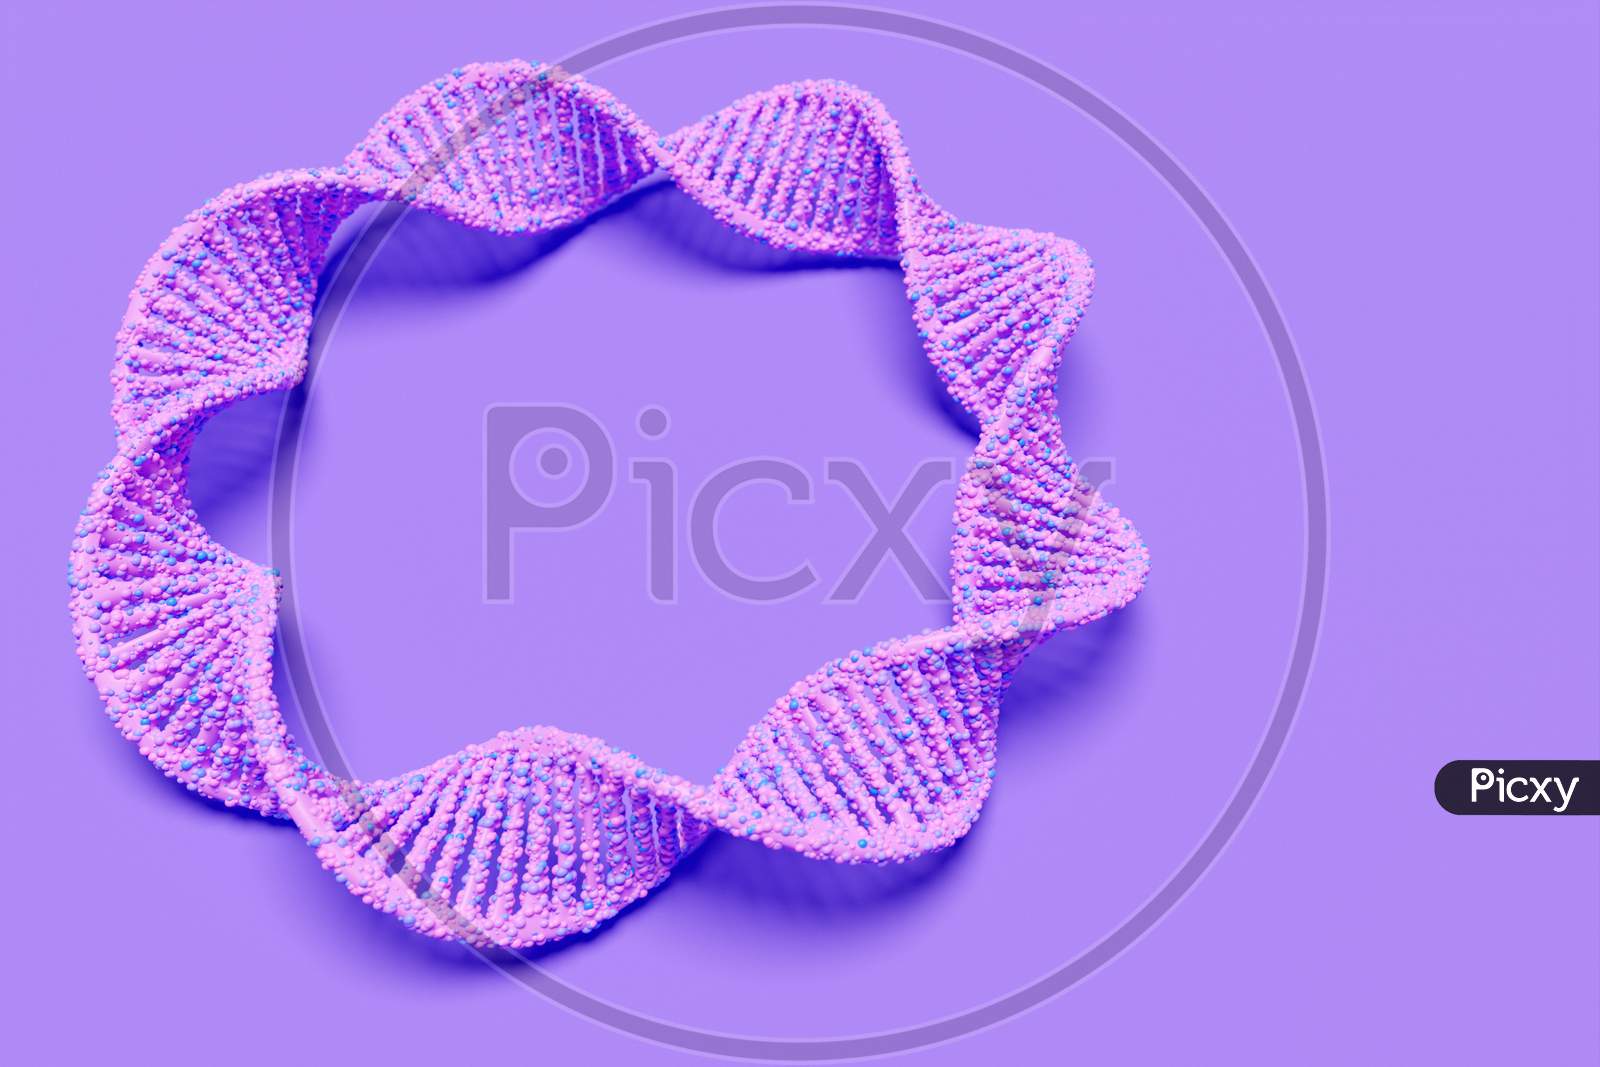 3D Illustration Of A Stereo Strip Of Different Colors. Geometric Stripes Similar To Waves. Simplified Pink   Dna Line On White Isolated Background